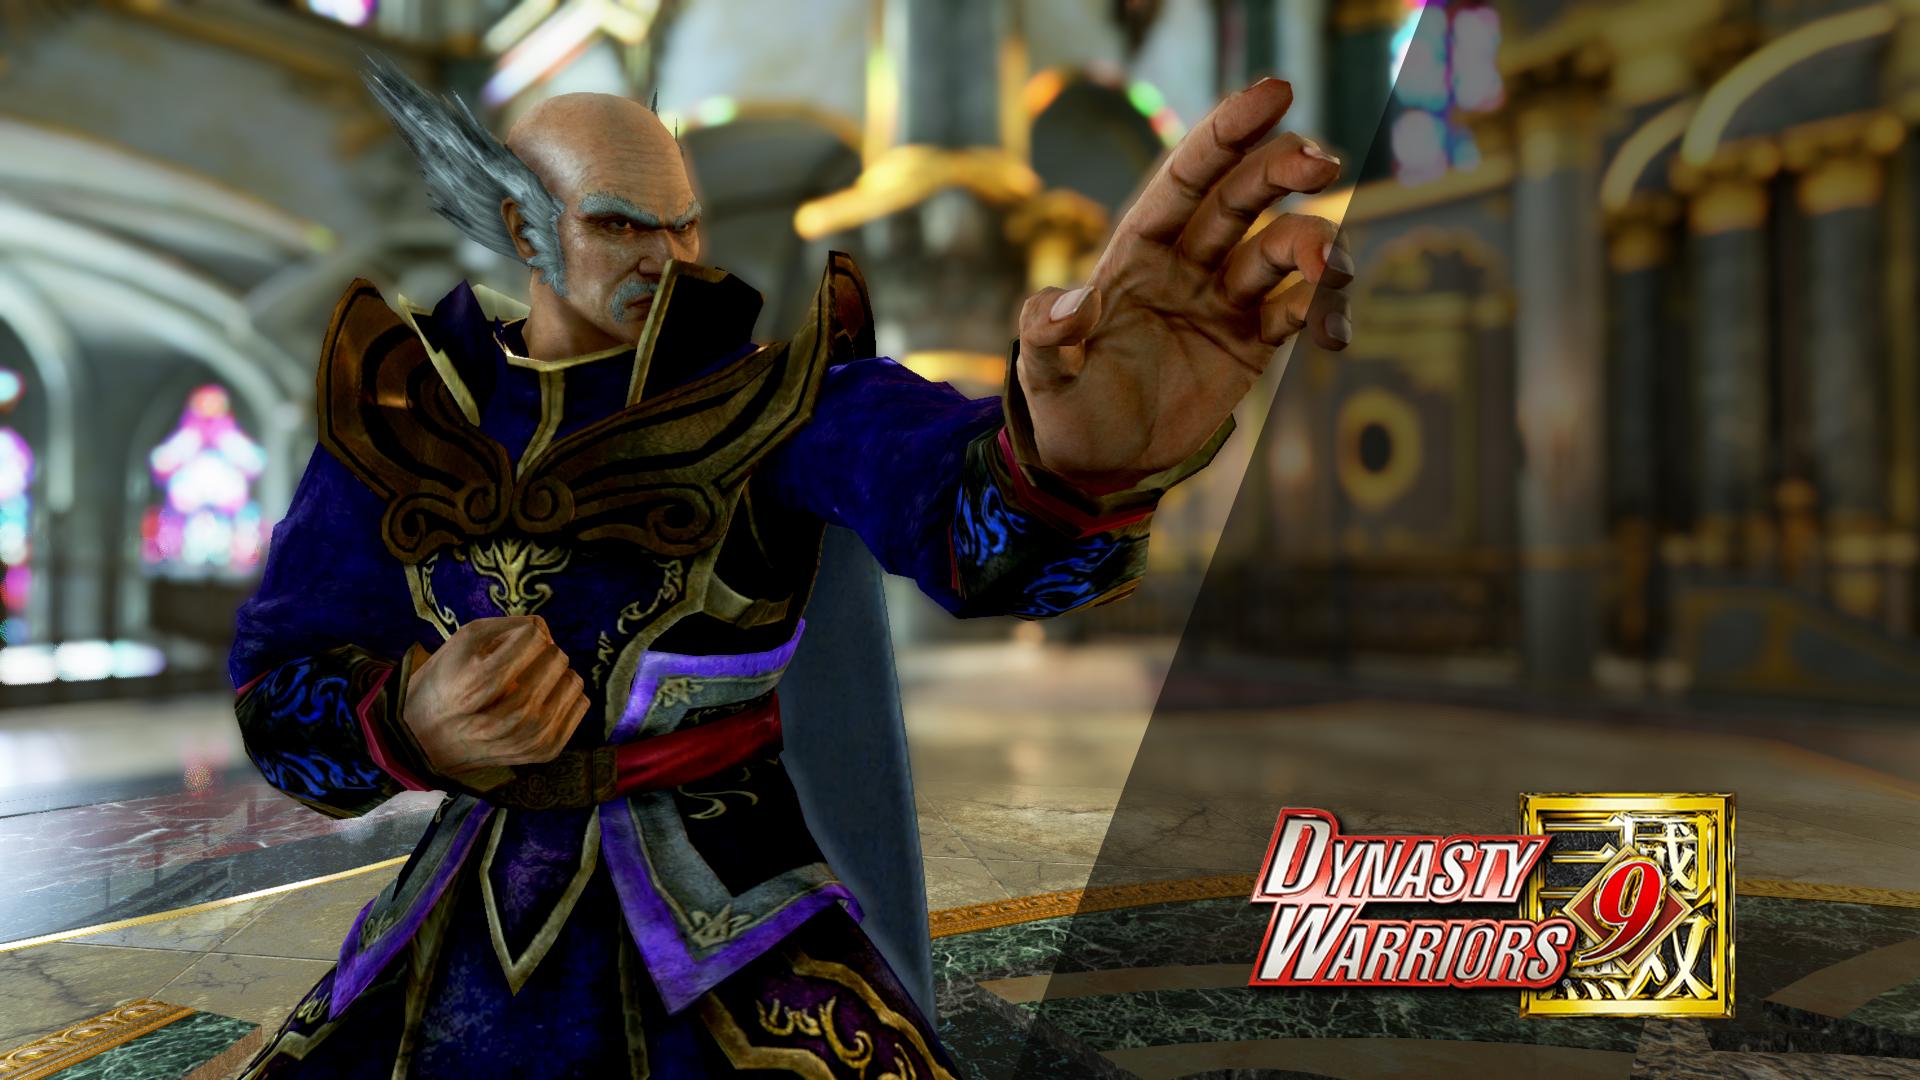 [DYNASTY WARRIORS 9] Caocao Outfit for Heihachi